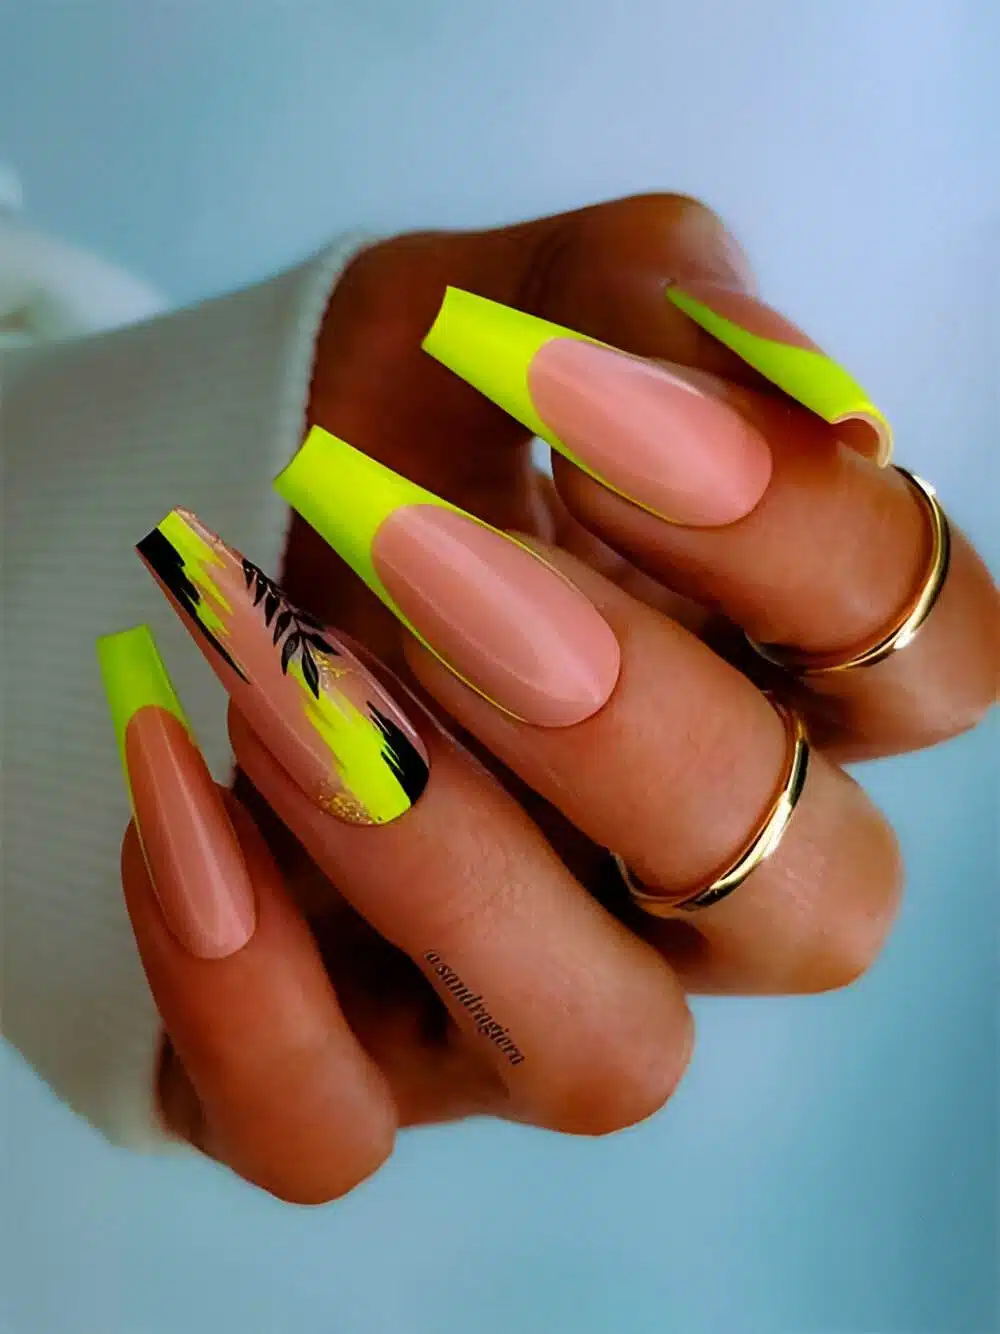 30 Colorful Nail Art Designs To Have Fun And Stay Fabulous - 223